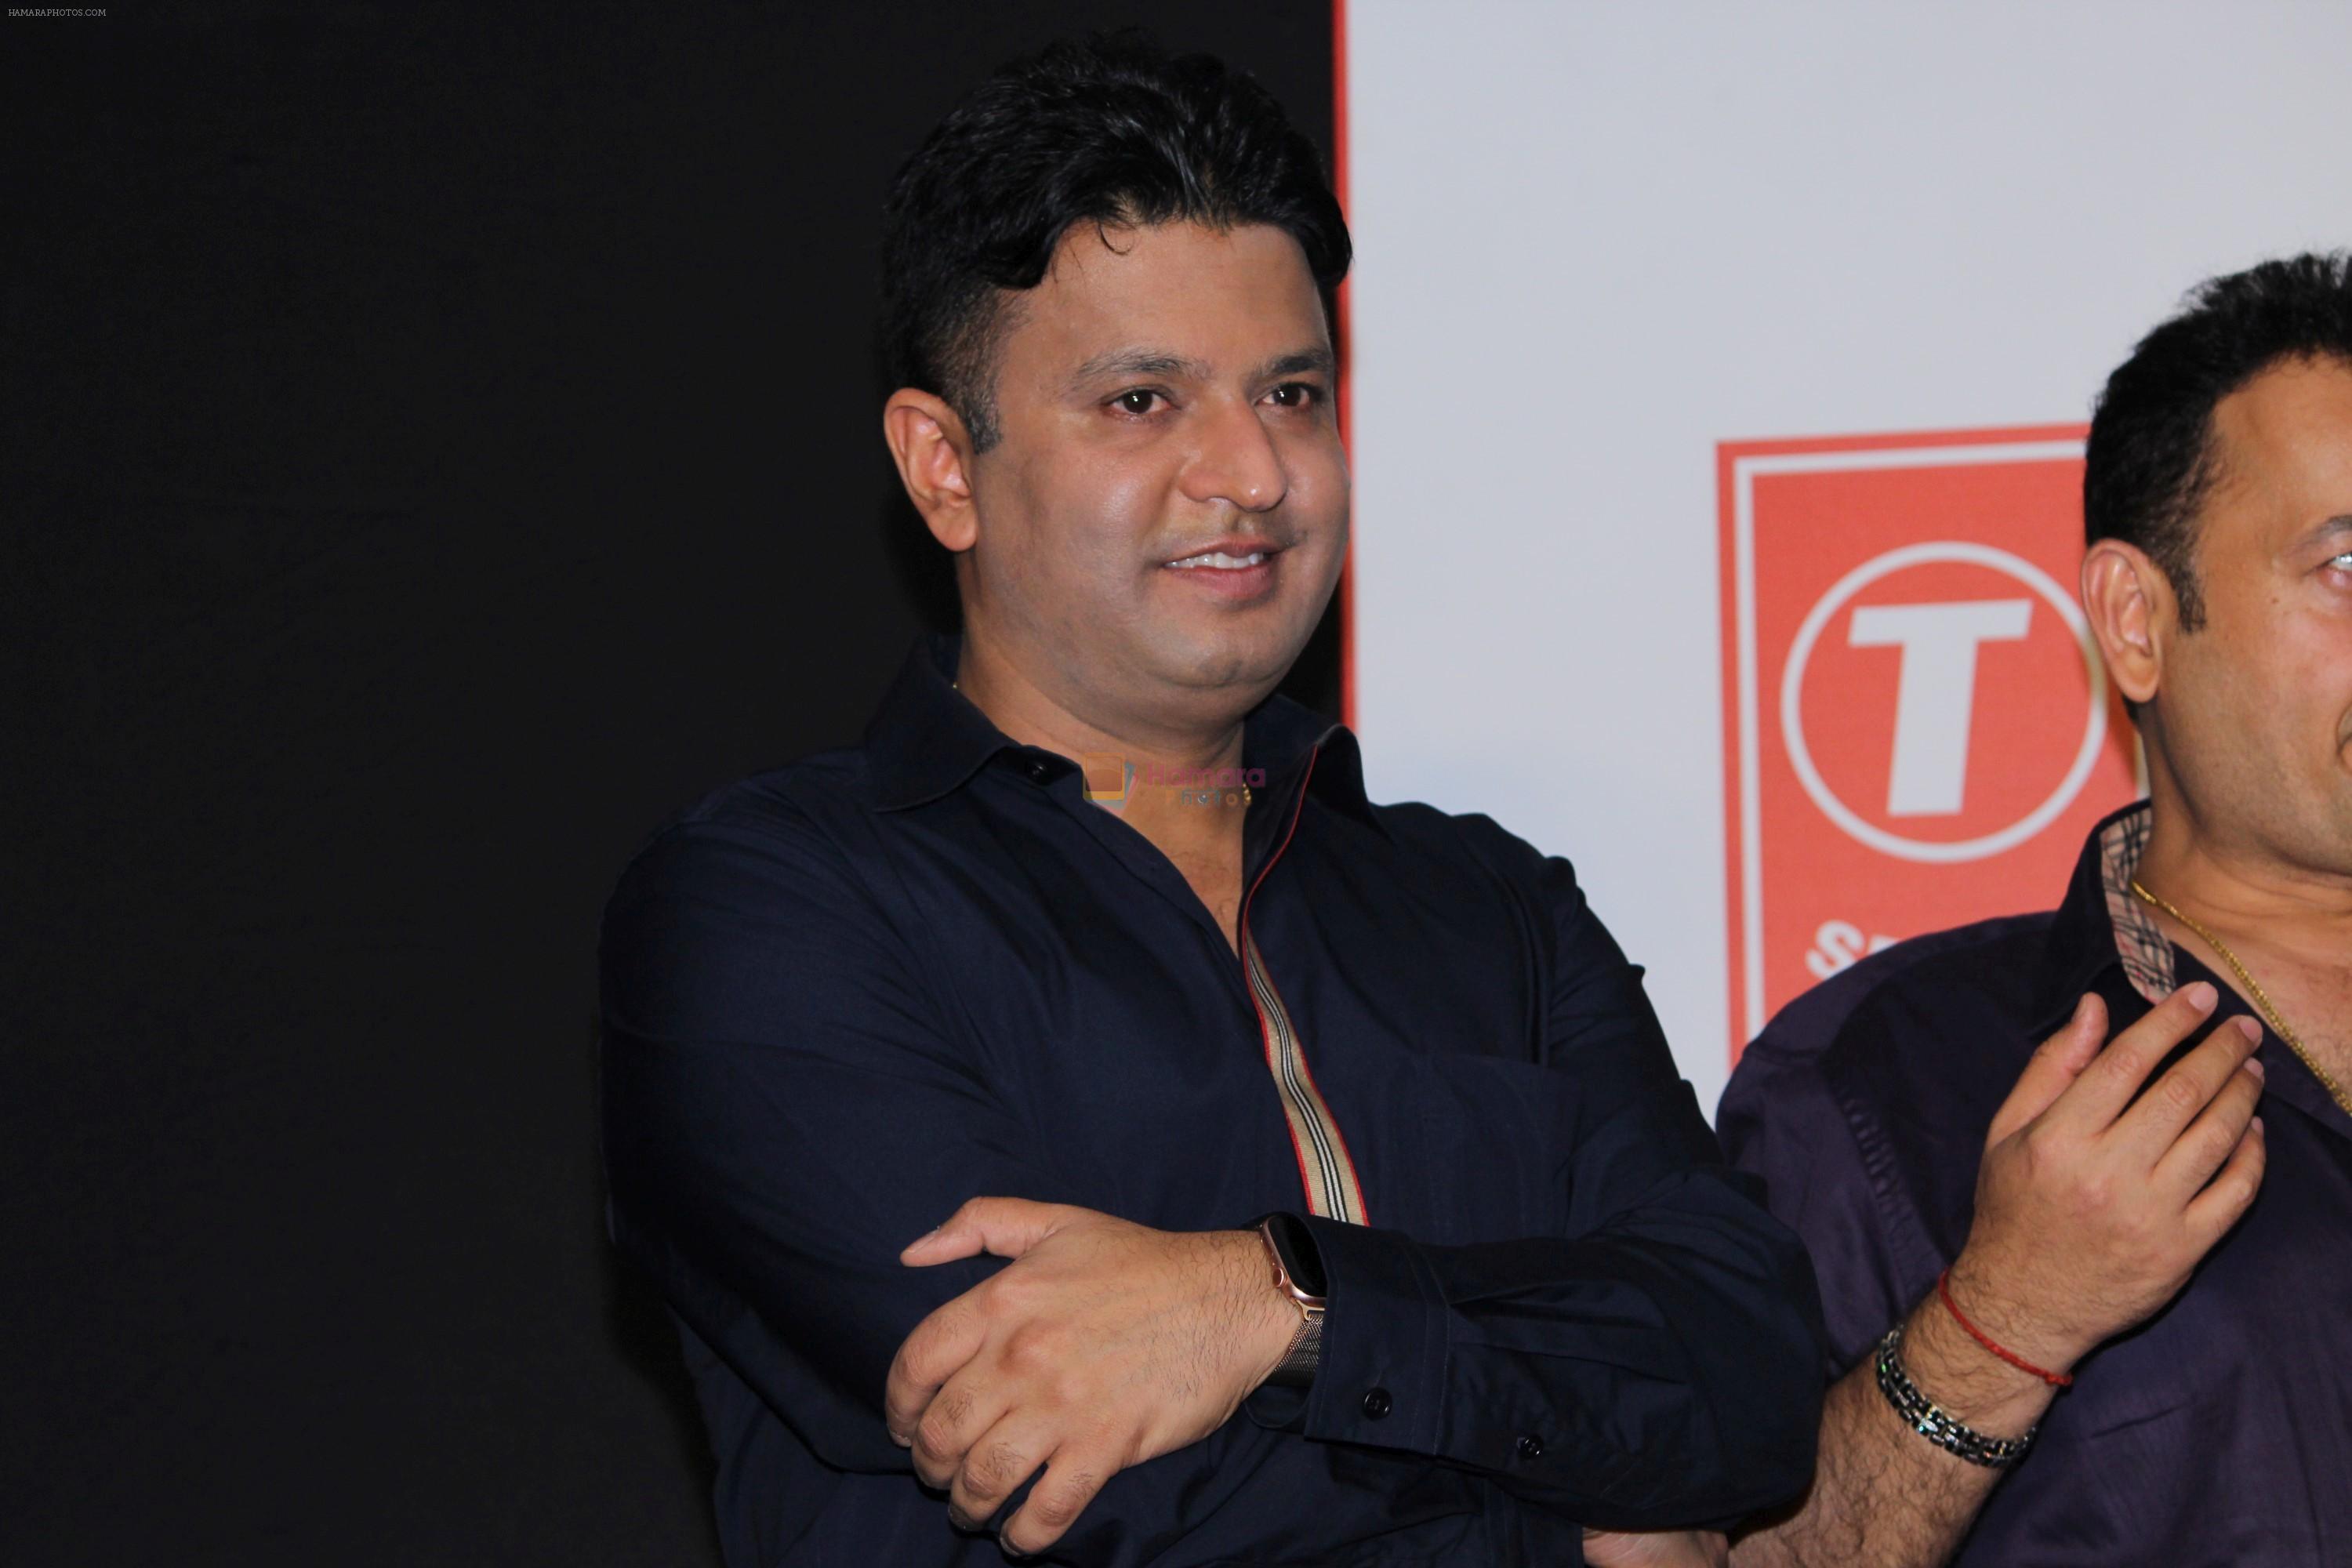 Bhushan Kumar has been felicitated with an official certificate from Guinness World Records as T-Series became the first YouTube channel to reach 100 million subscribers on 17th June 2019